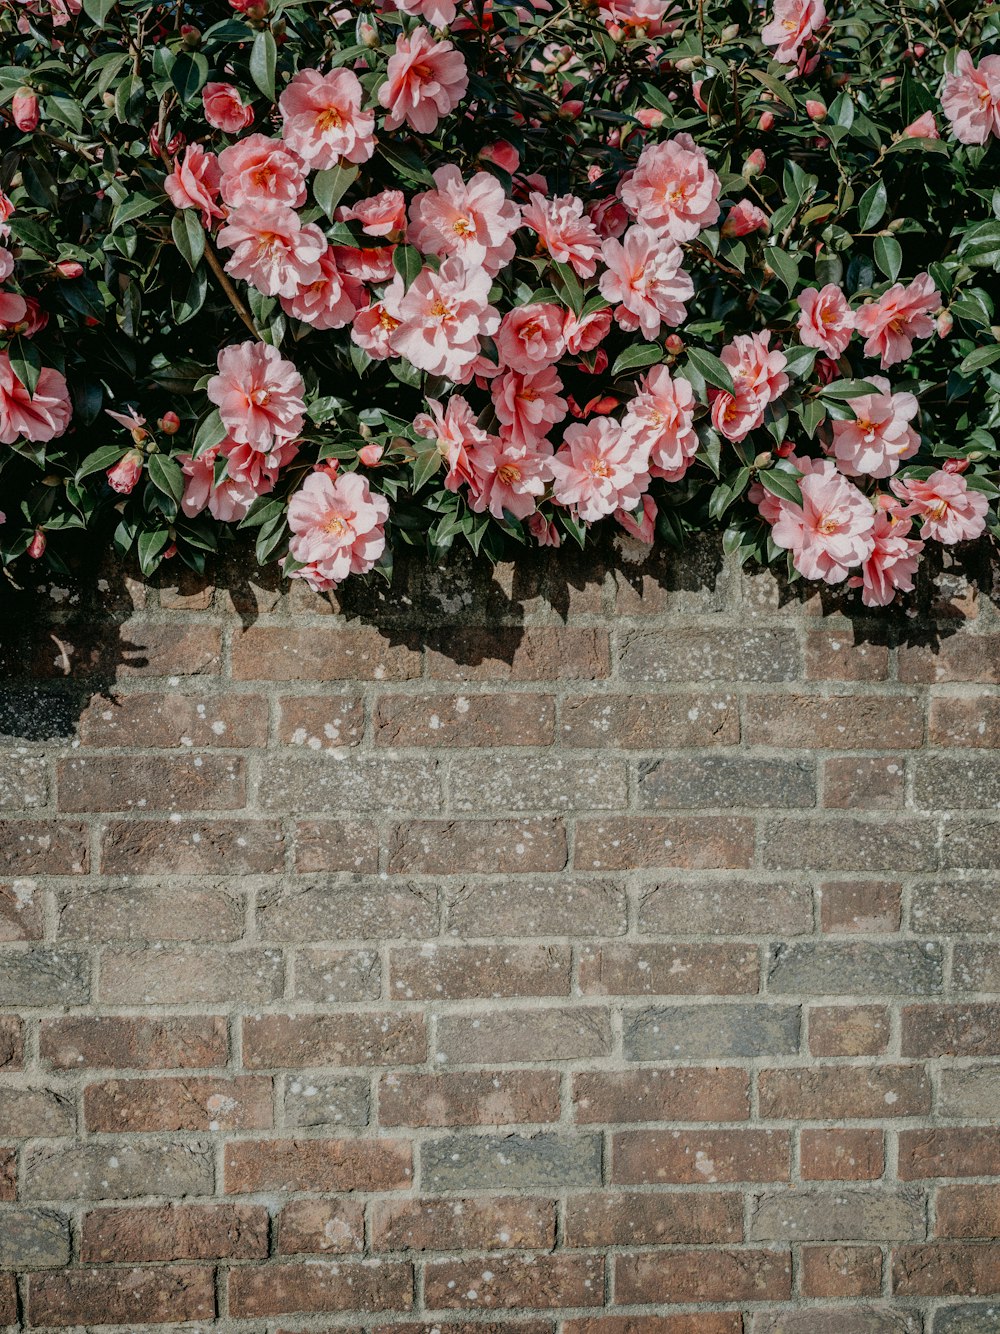 a brick wall with pink flowers growing on it